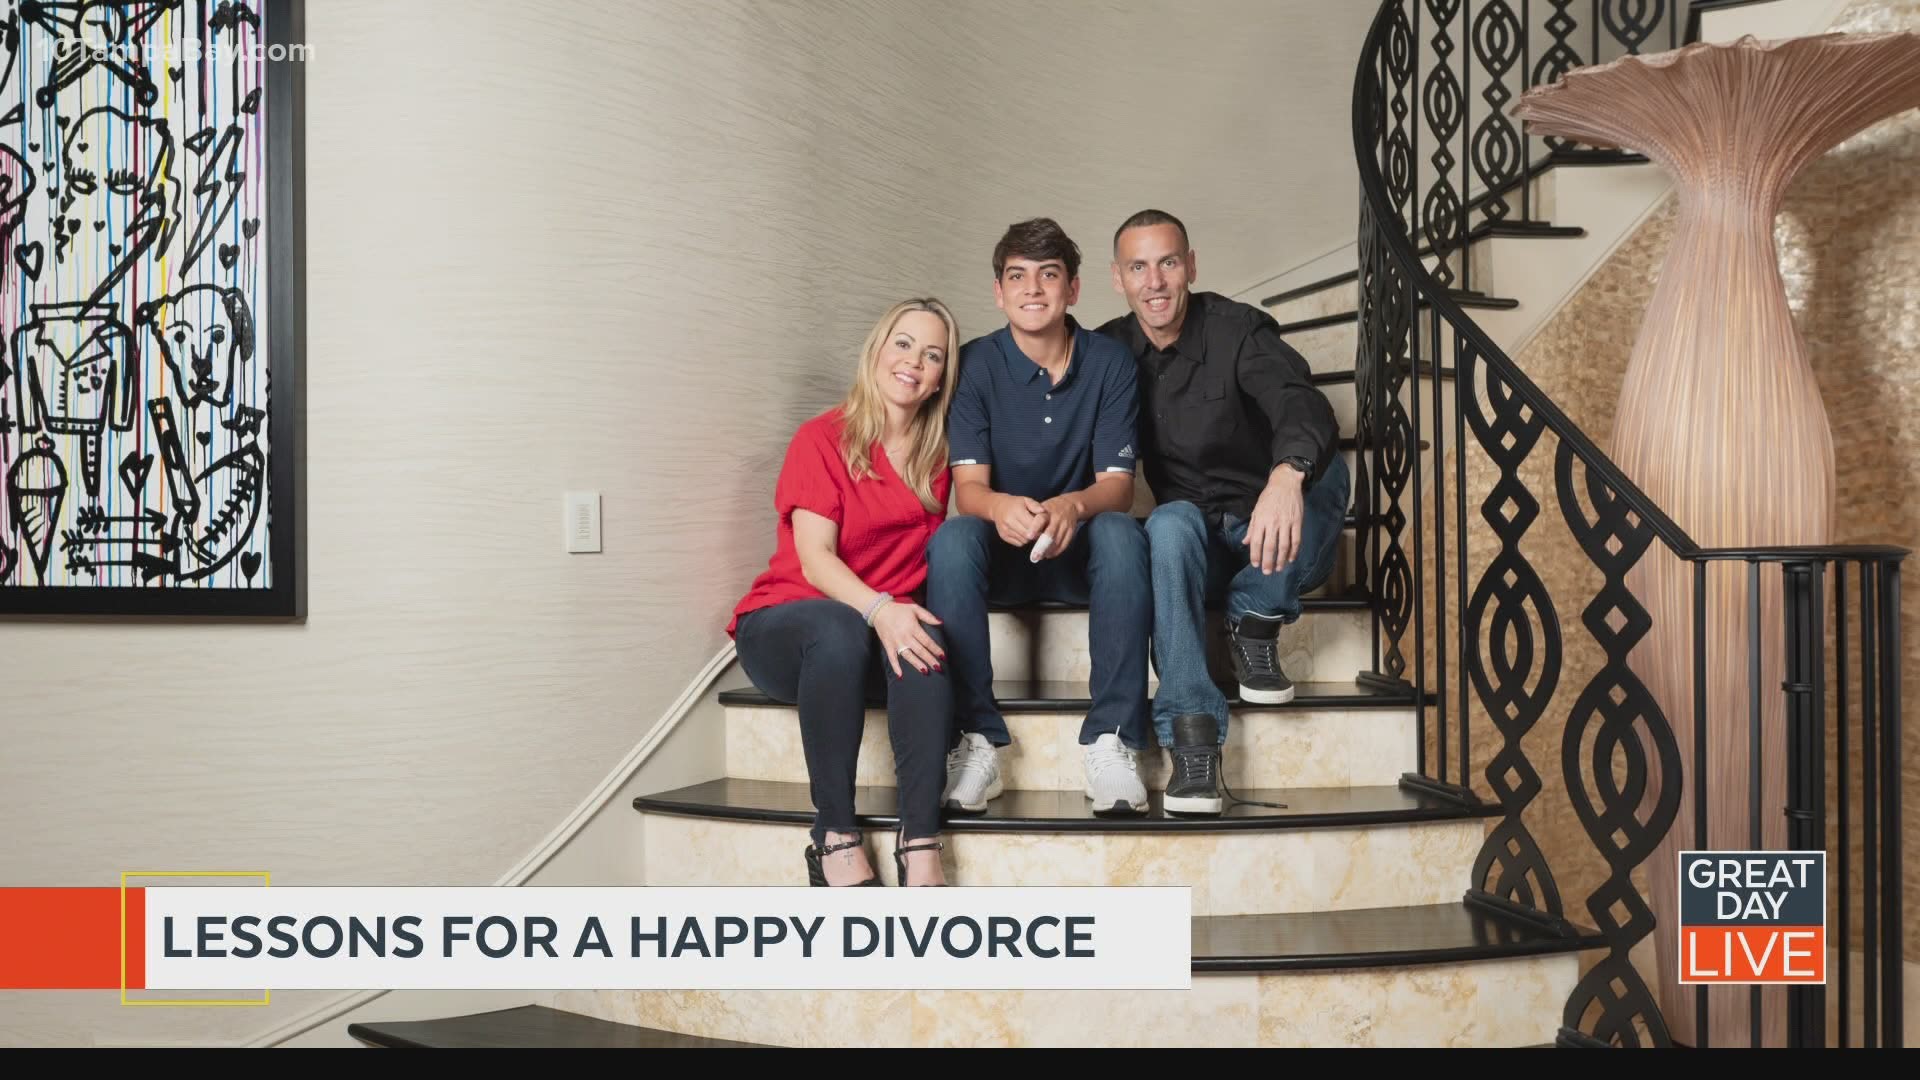 Learn more at ourhappydivorce.com.